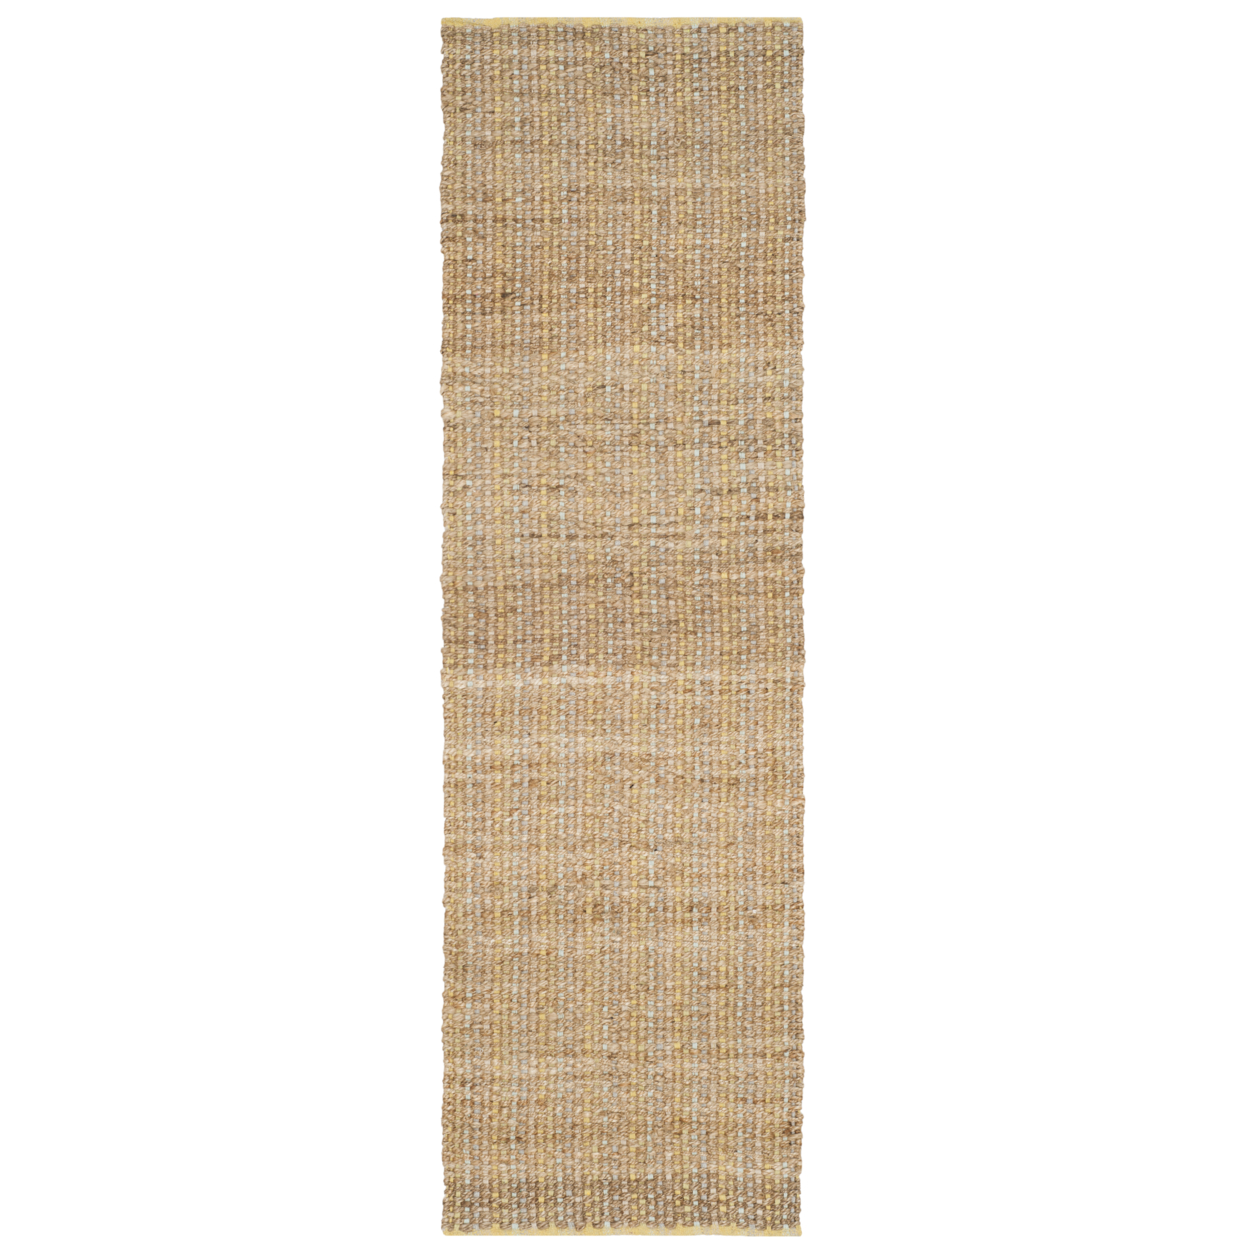 SAFAVIEH Cape Cod Collection CAP811A Handwoven Yellow Rug - 8' X 10'